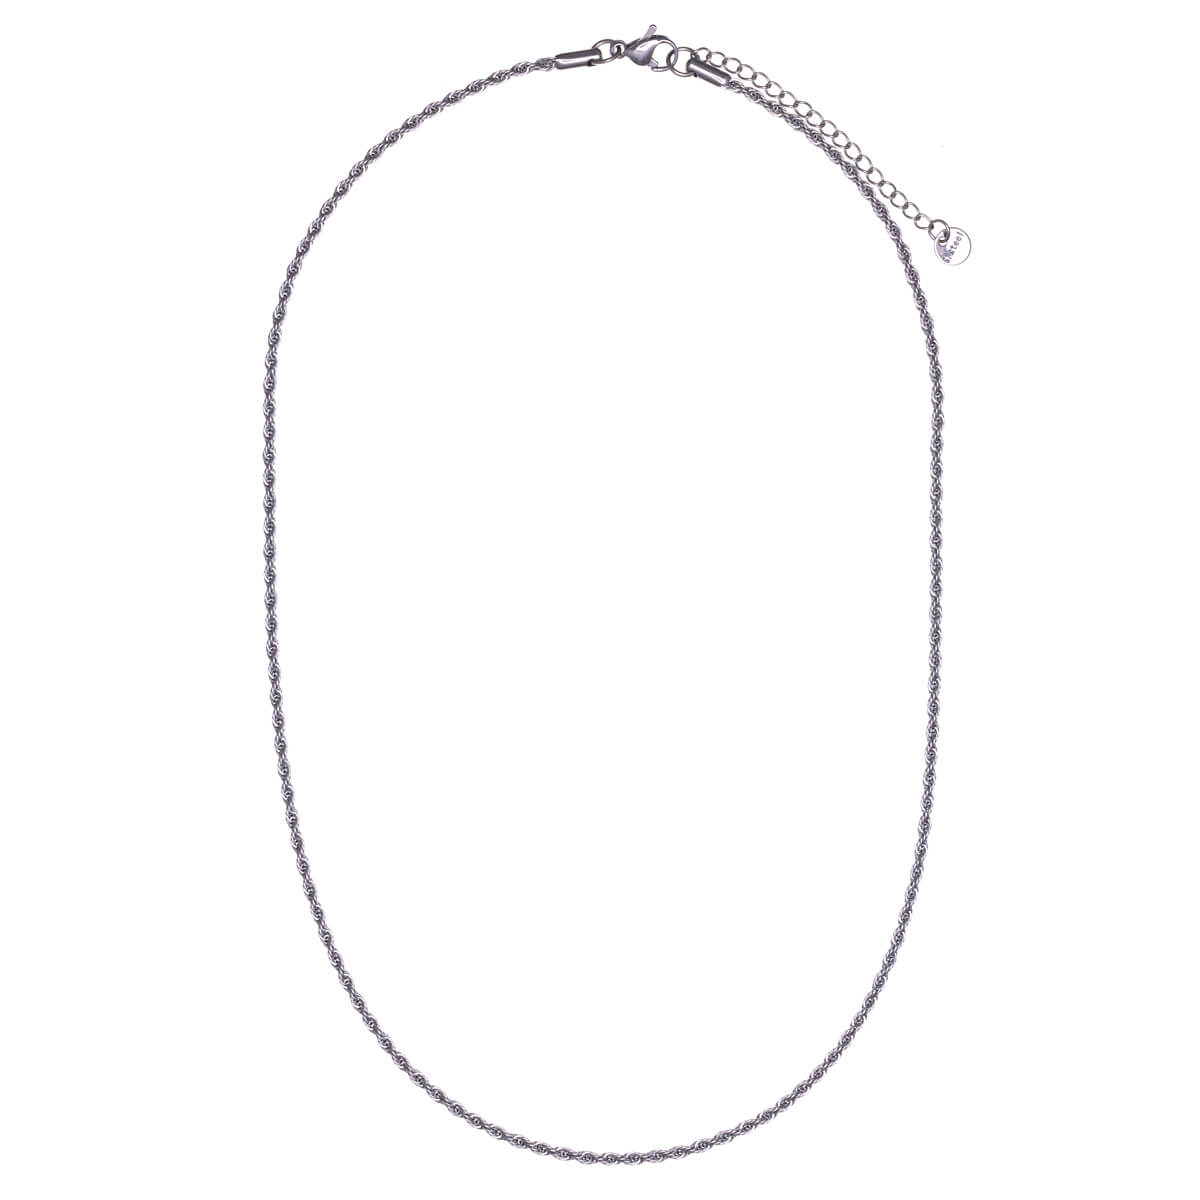 Rope chain steel chain necklace 2mm 45cm +5cm